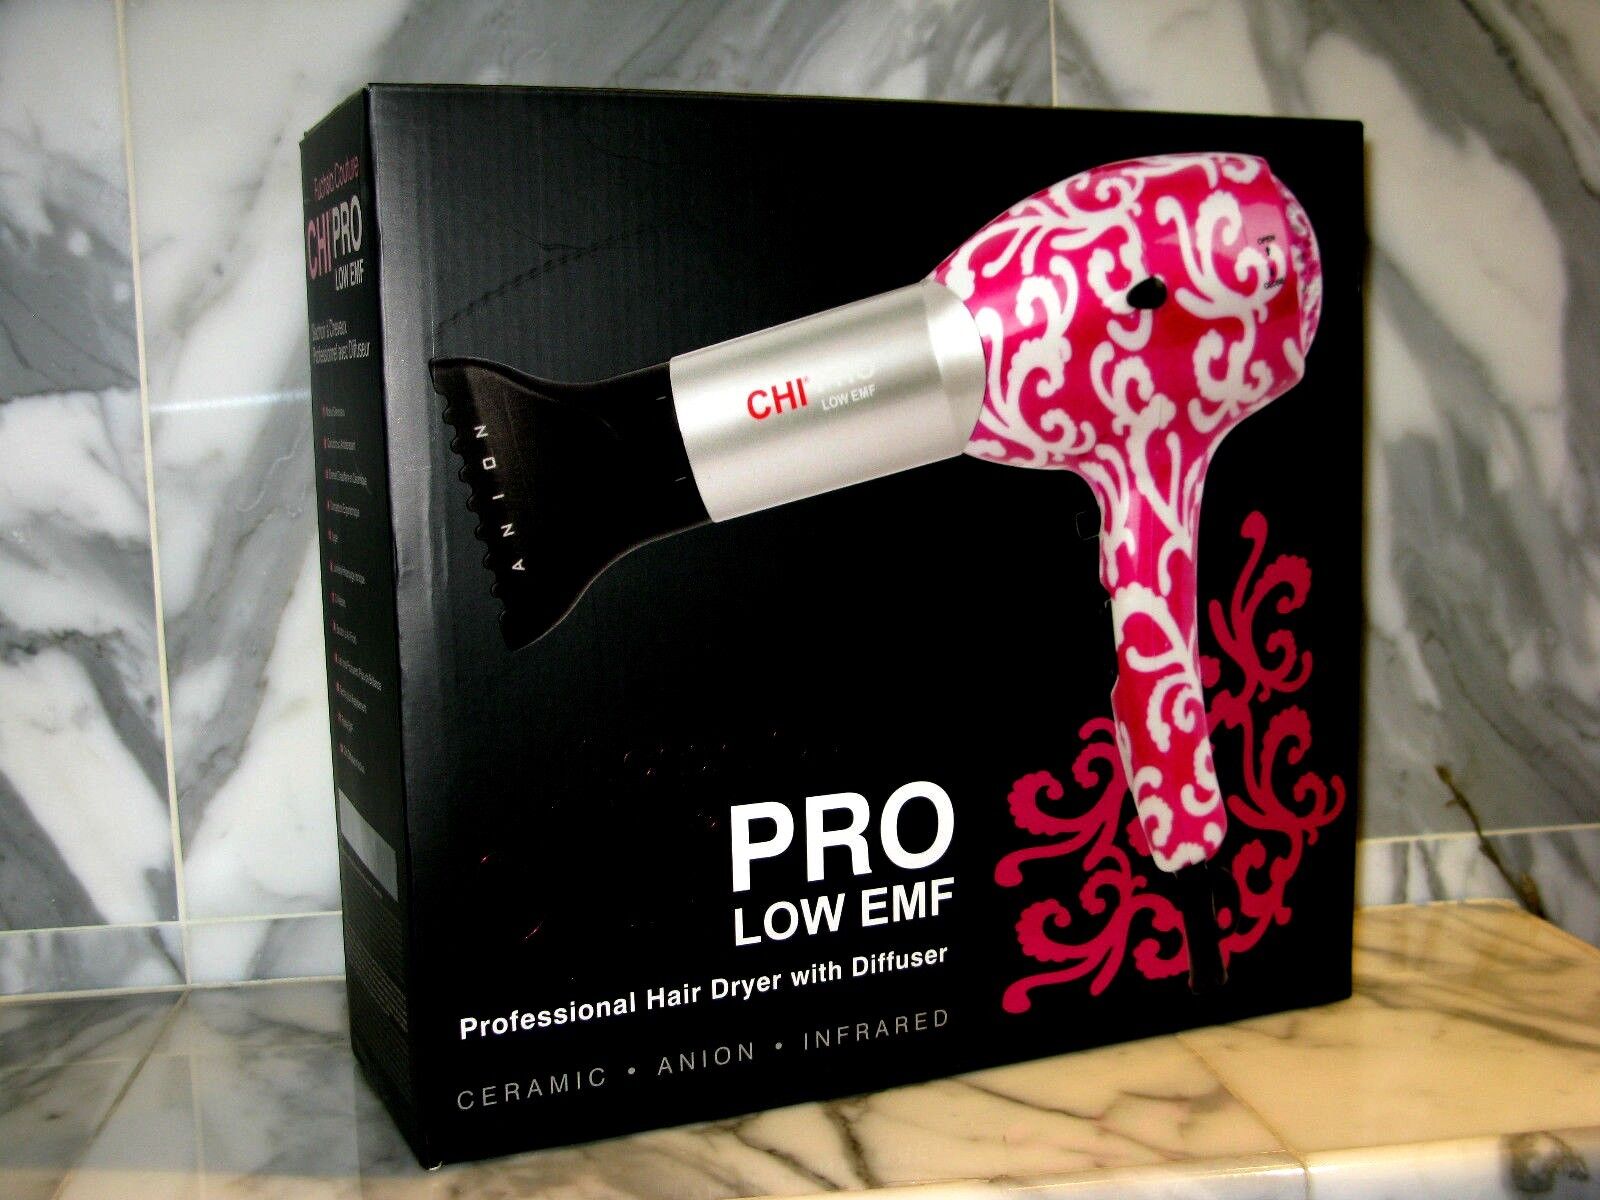 CHI Pro Low EMF Fuchsia Couture Professional Hair Dryer With